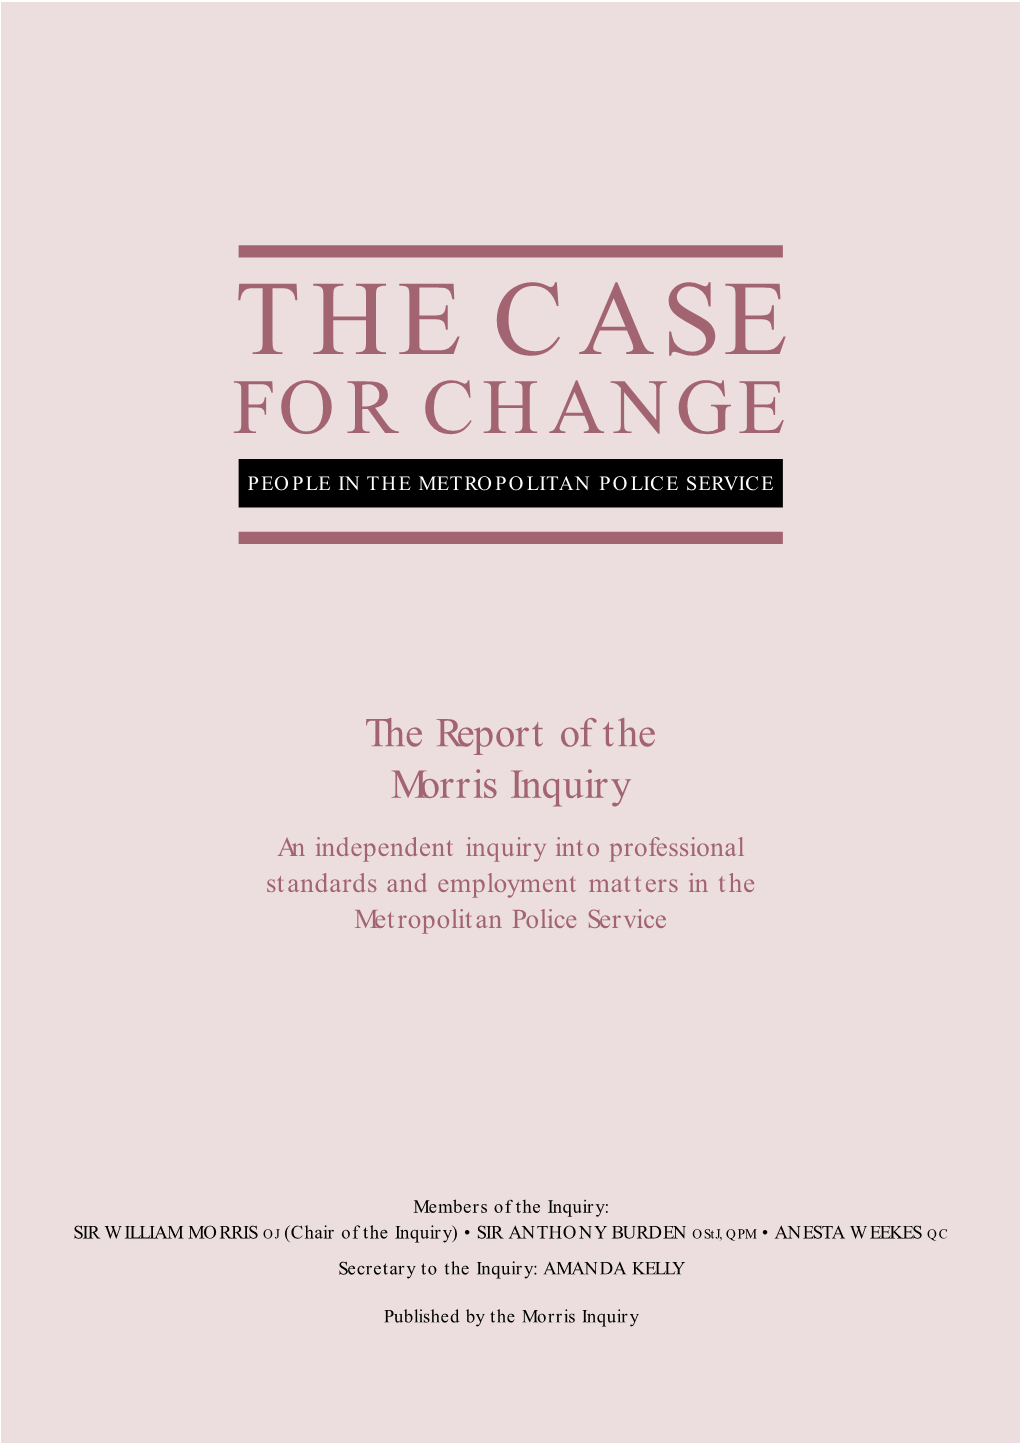 Final Report of the Morris Inquiry: the Case for Change